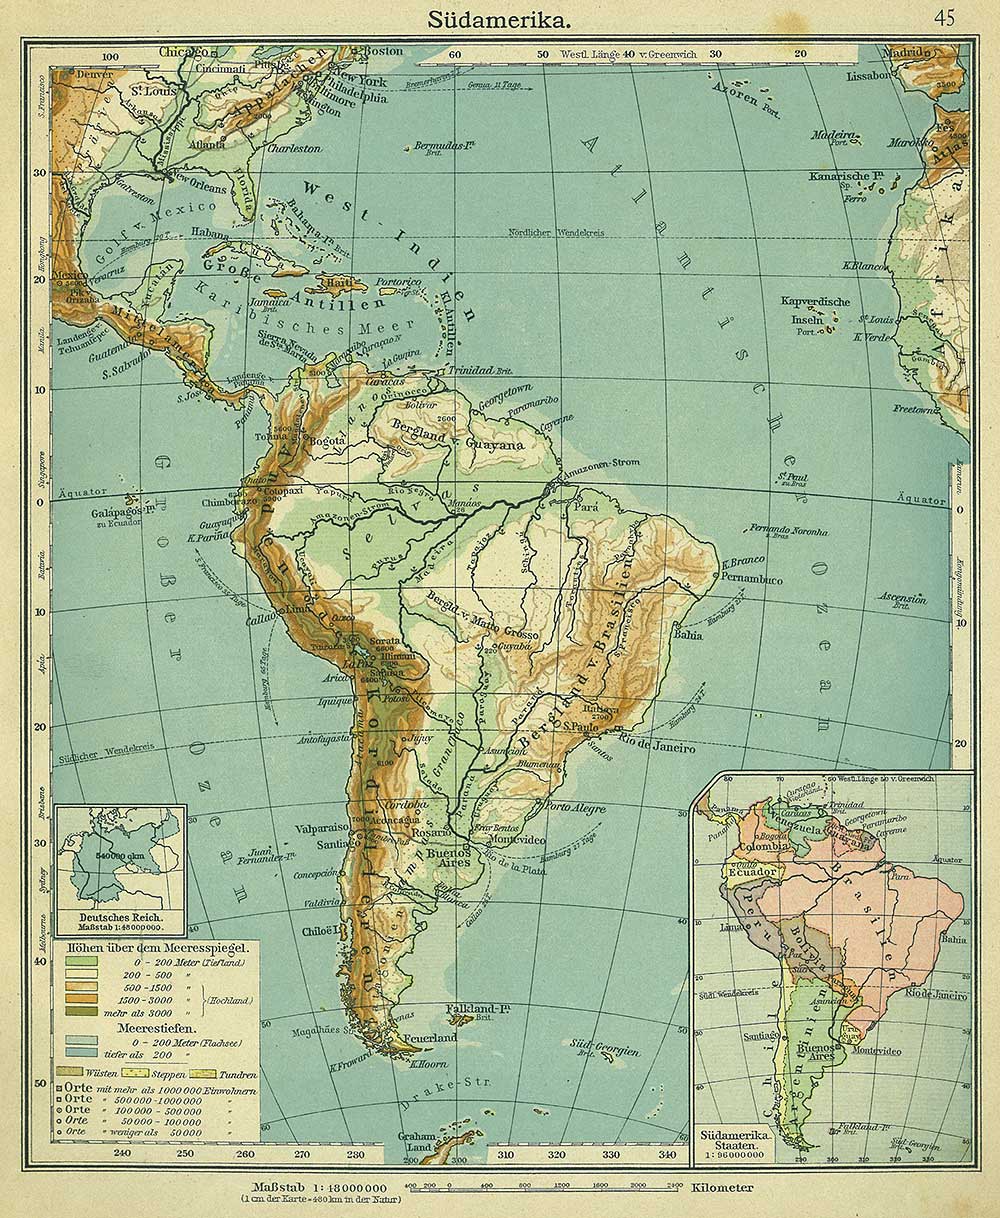 South America, Andrees 'Berliner Schul-Atlas', 1916, page 45, published size to print borders 21.03 cm wide by 26.12 cm high.